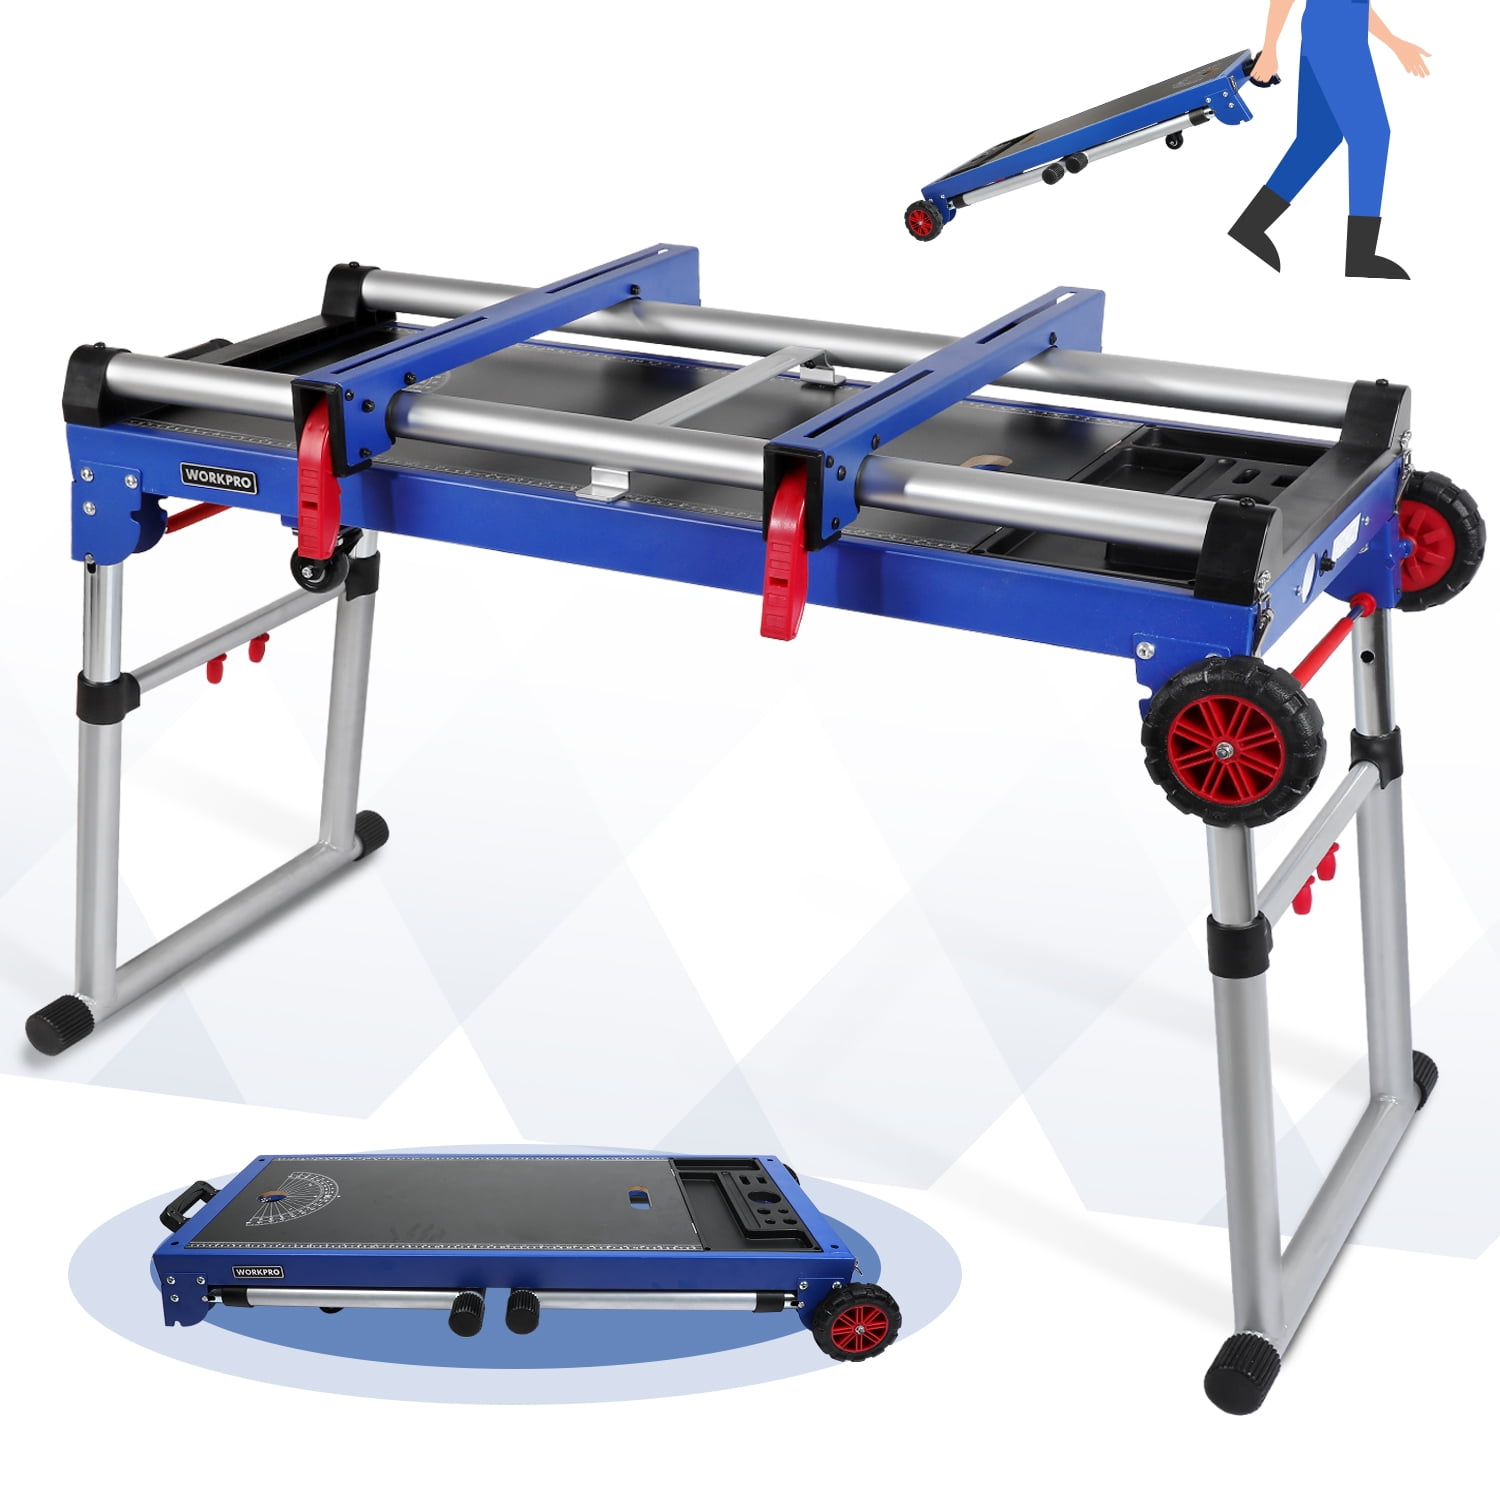 Keter Folding Work Table — 750-Lb. Capacity with Extendable Legs